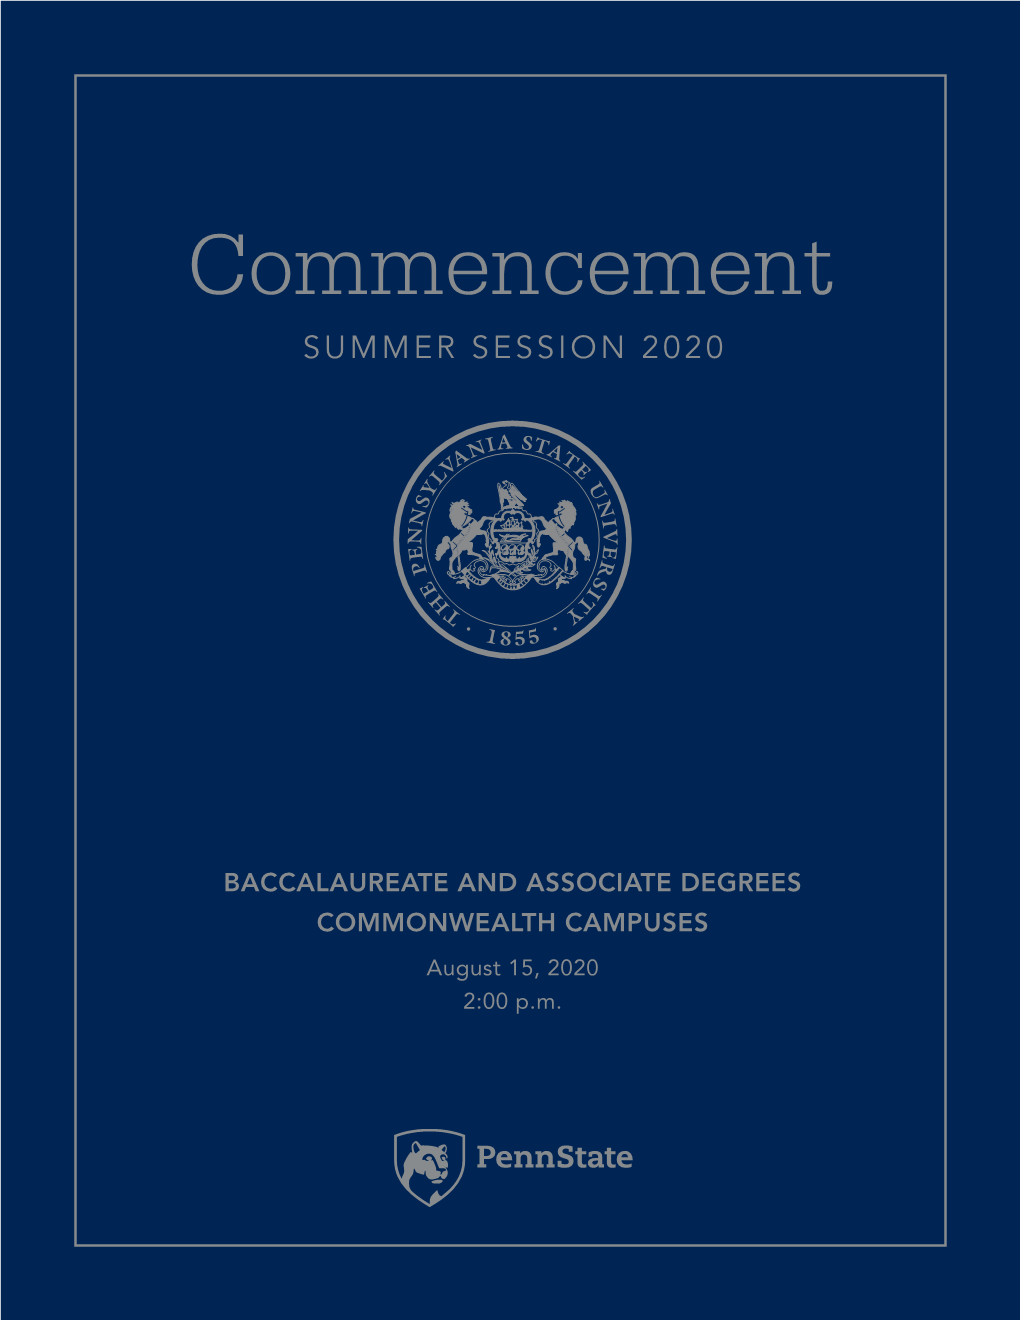 BACCALAUREATE and ASSOCIATE DEGREES COMMONWEALTH CAMPUSES August 15, 2020 2:00 P.M